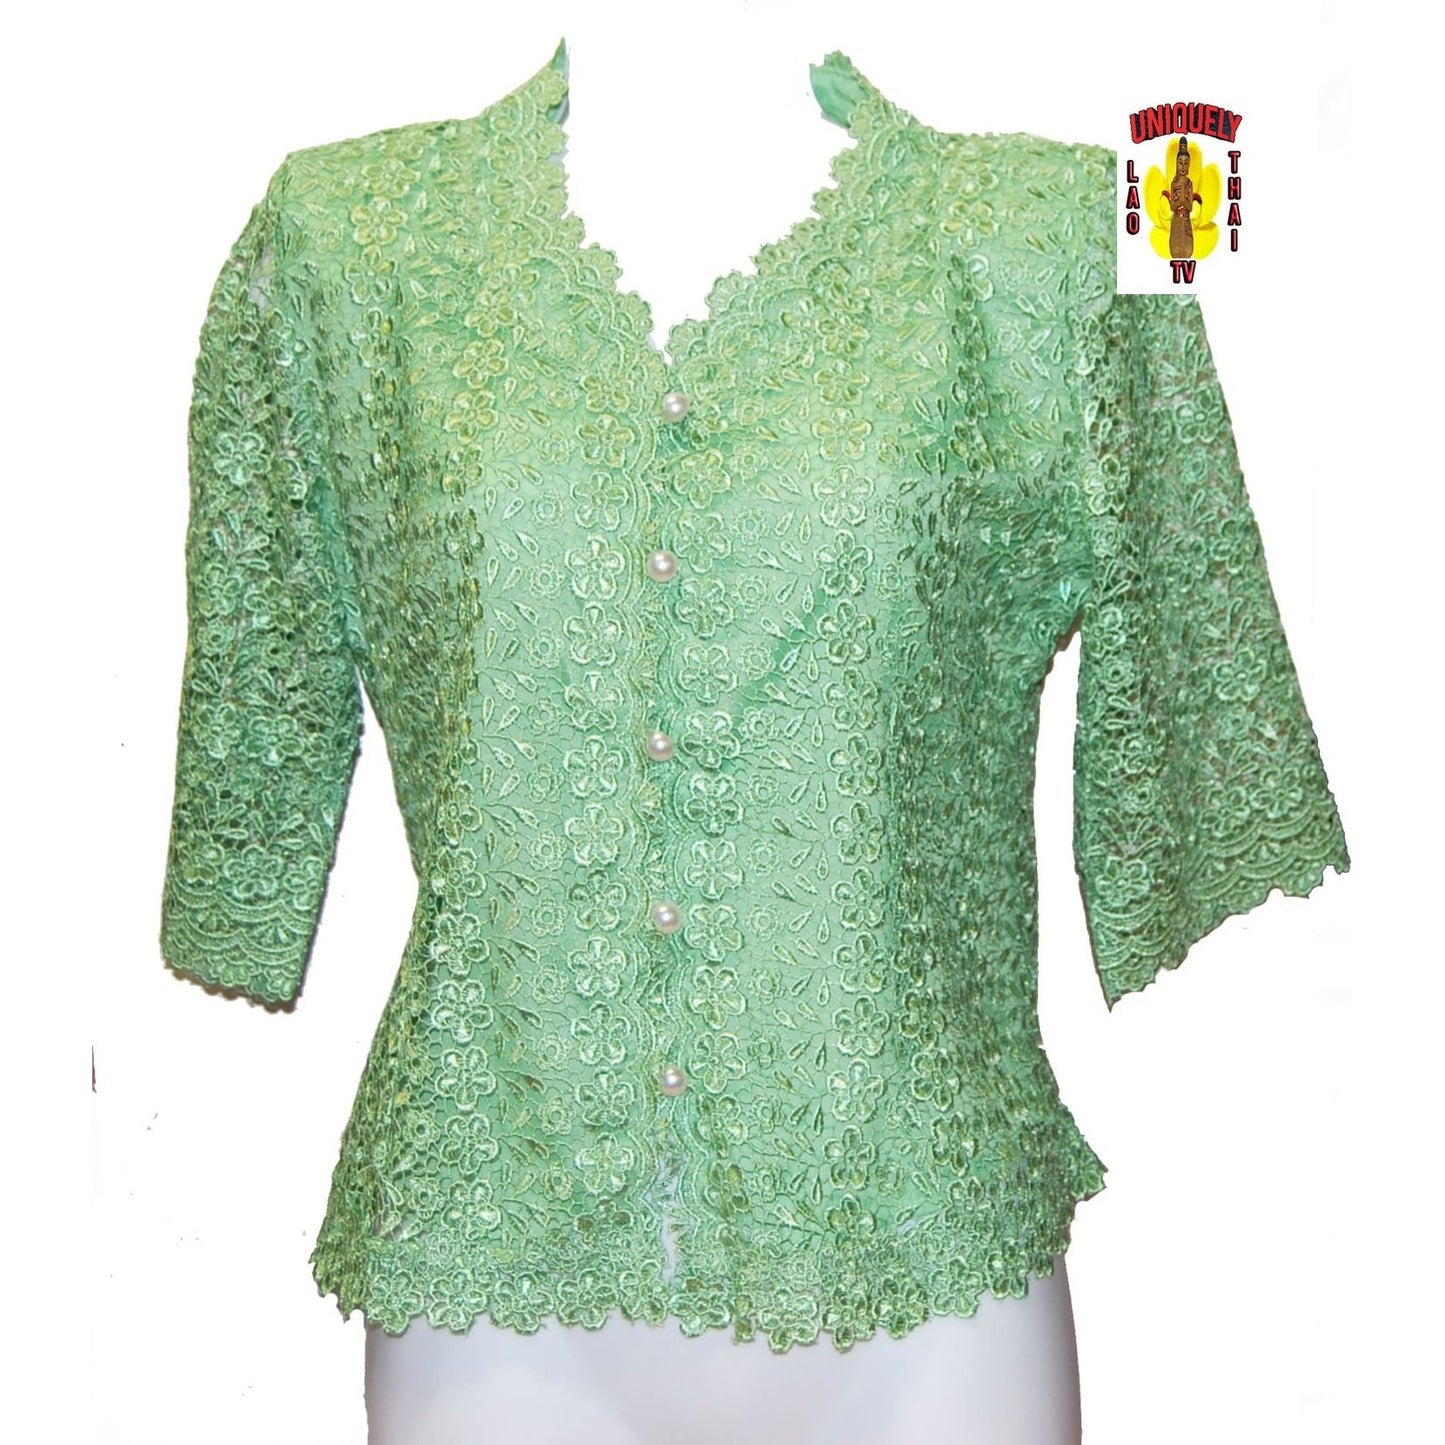 Traditional Thai Laos Lace Blouse Green